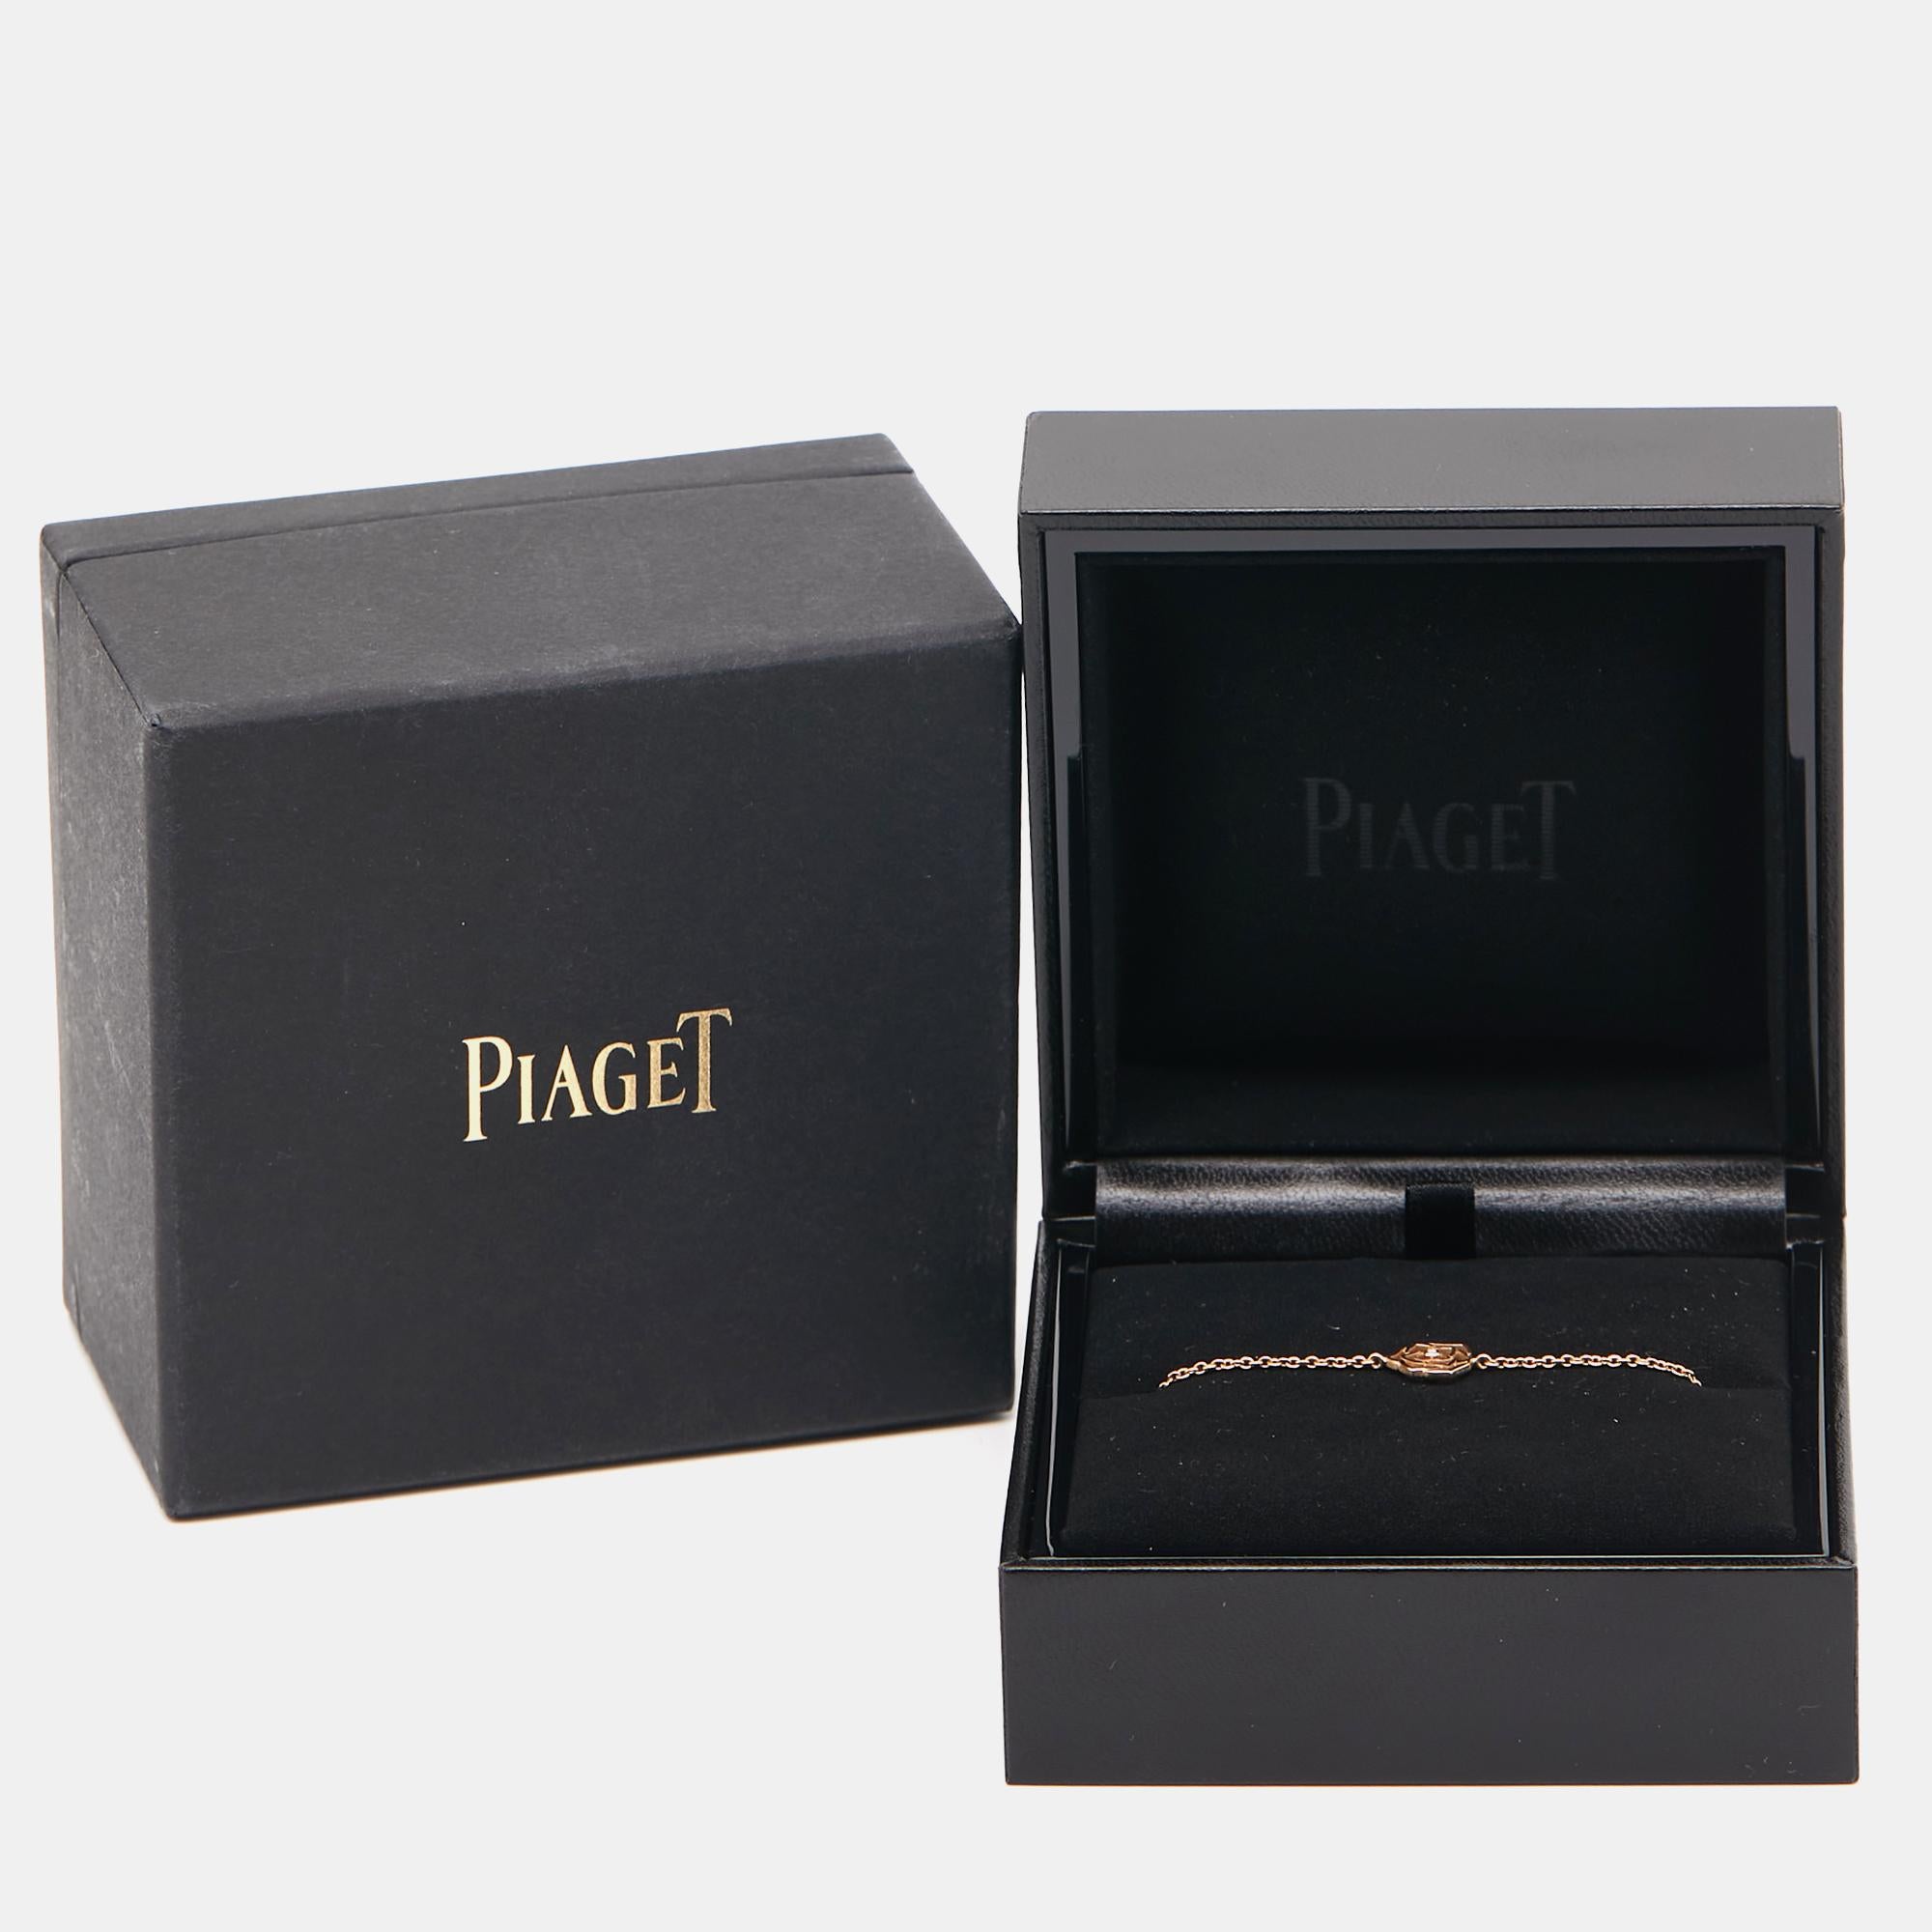 Piaget's Rose collection celebrates the beauty and essence of a rose for it is indeed the most romantic of nature's flowers. This exquisite bracelet successfully transfers that essence into 18K rose gold. A blooming rose with its petals skillfully